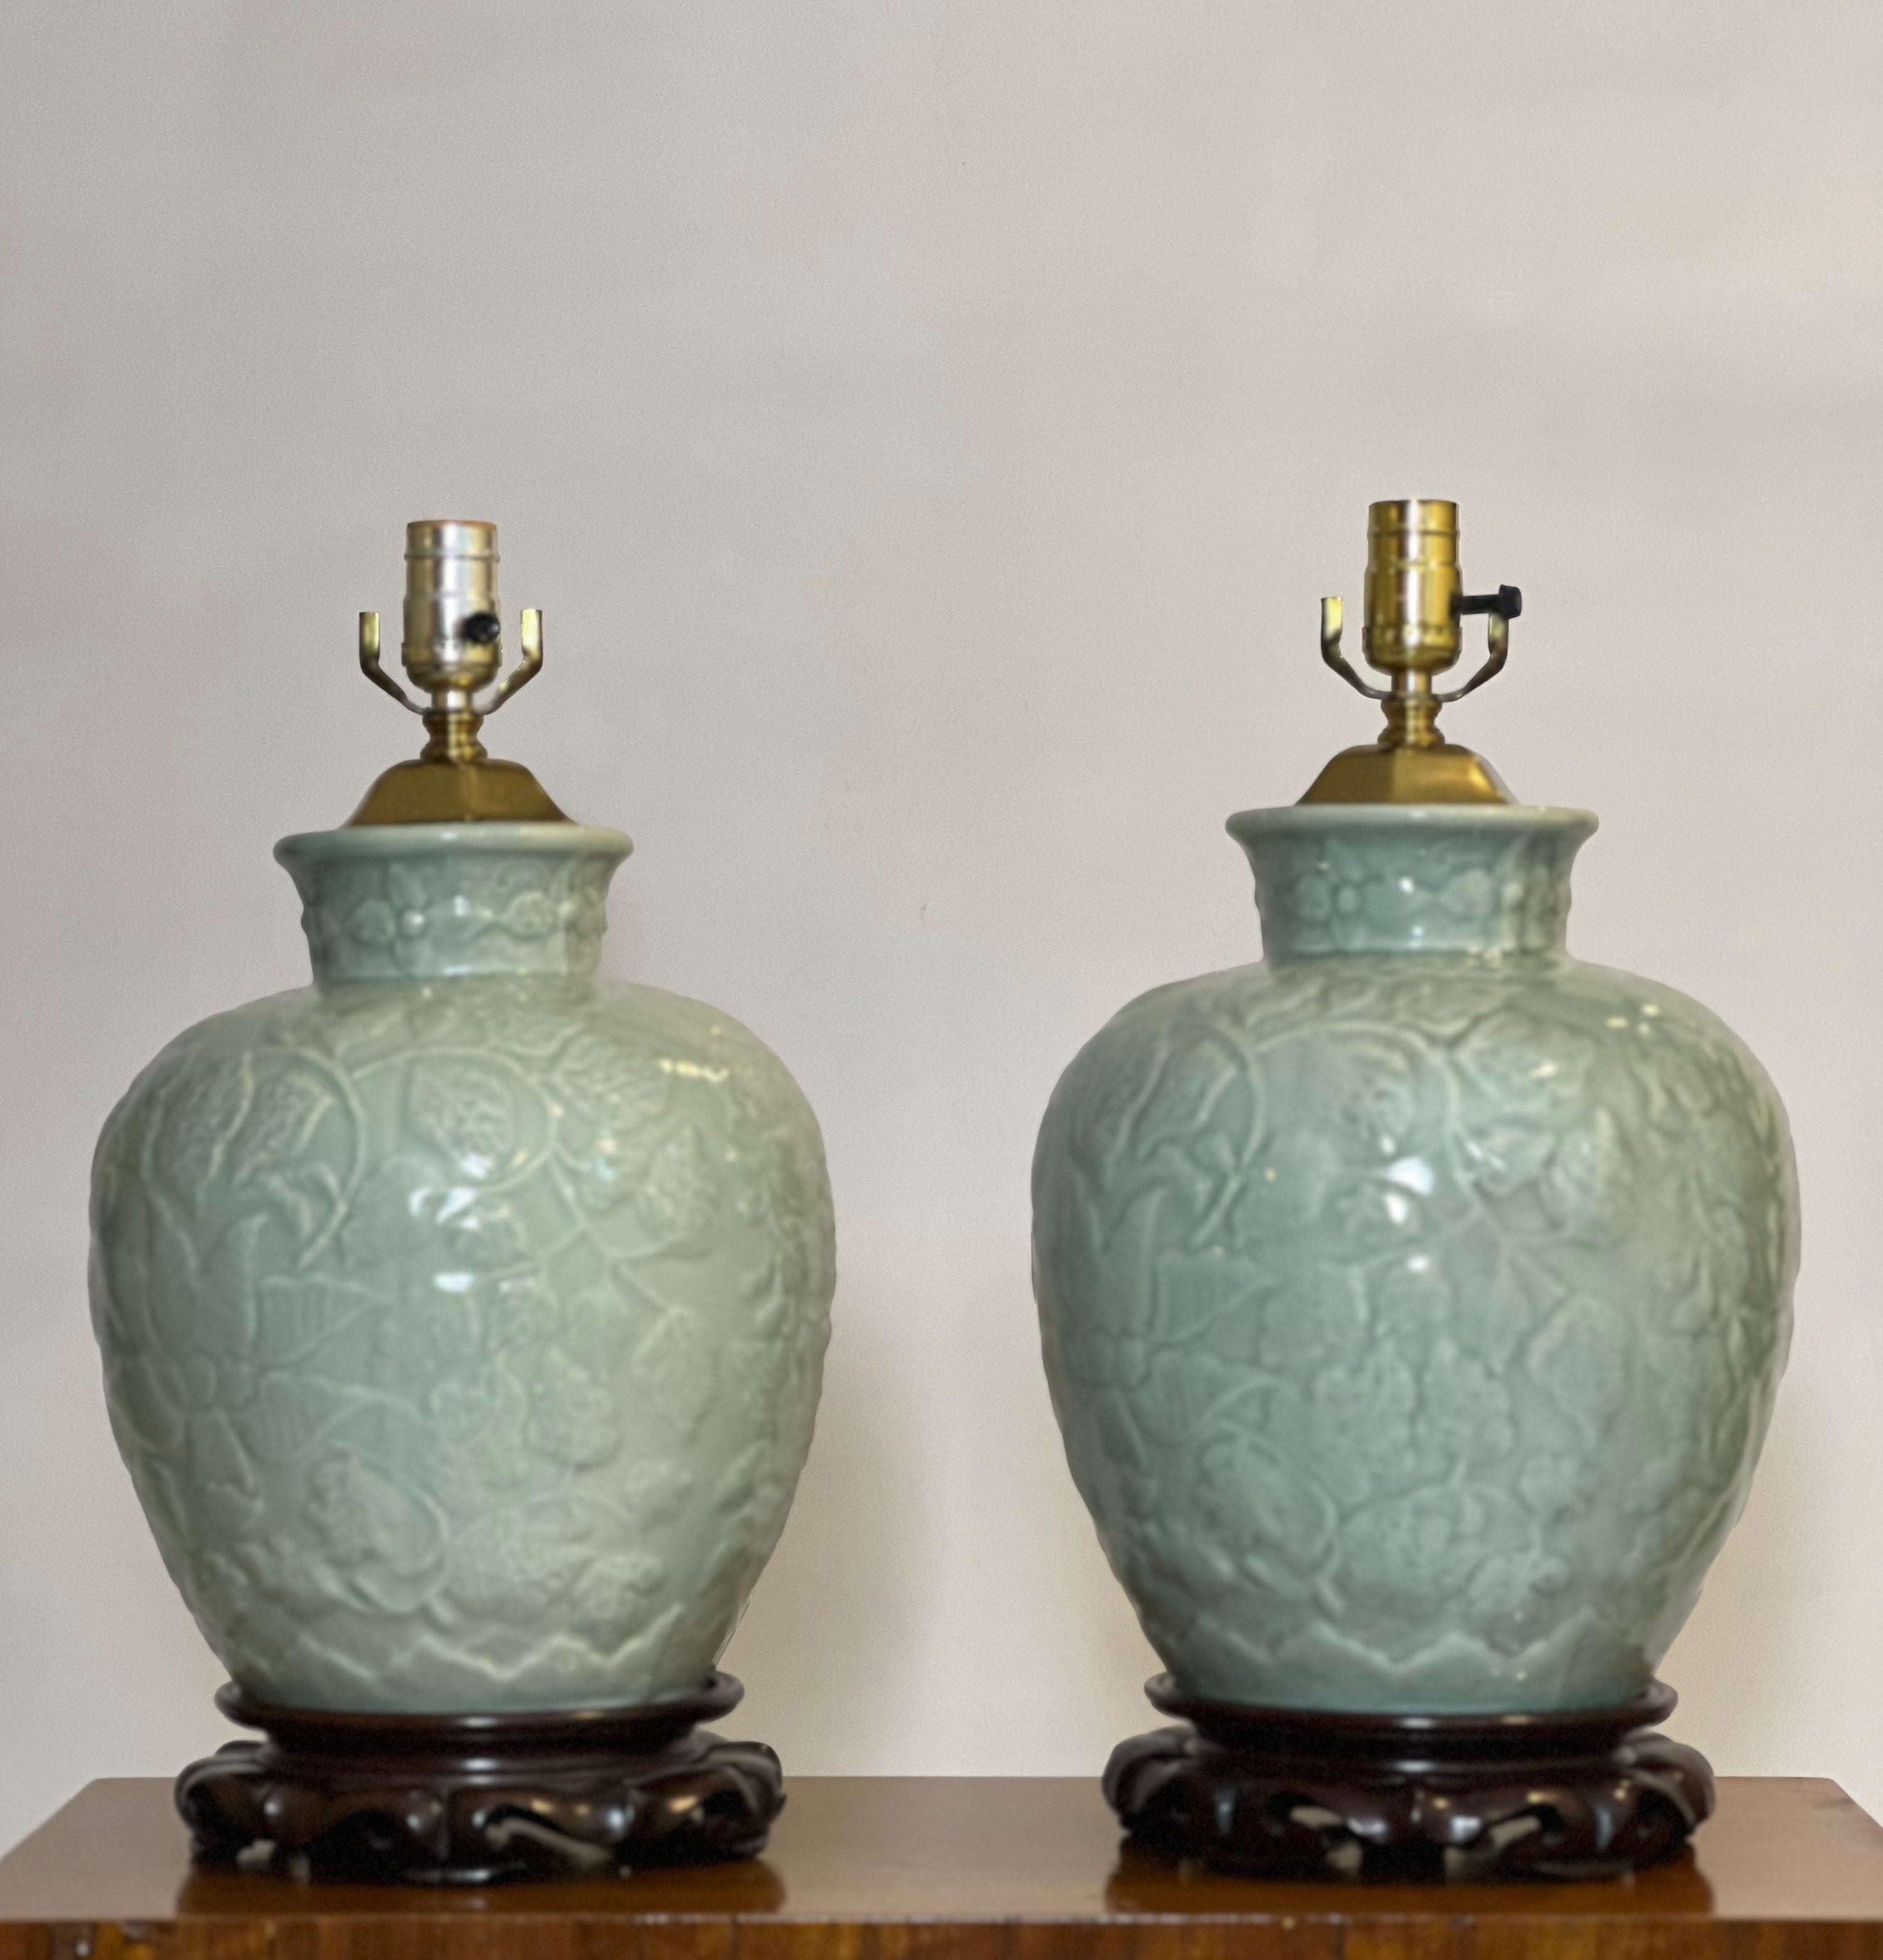 Pair of mid 20th century Chinese Celadon ginger jar style table lamps.

Gorgeous lamps in a finely crackled glaze with a raised floral and foliate design. They are set upon carved hardwood bases and have beautifully shaped, shiny brass adornments at